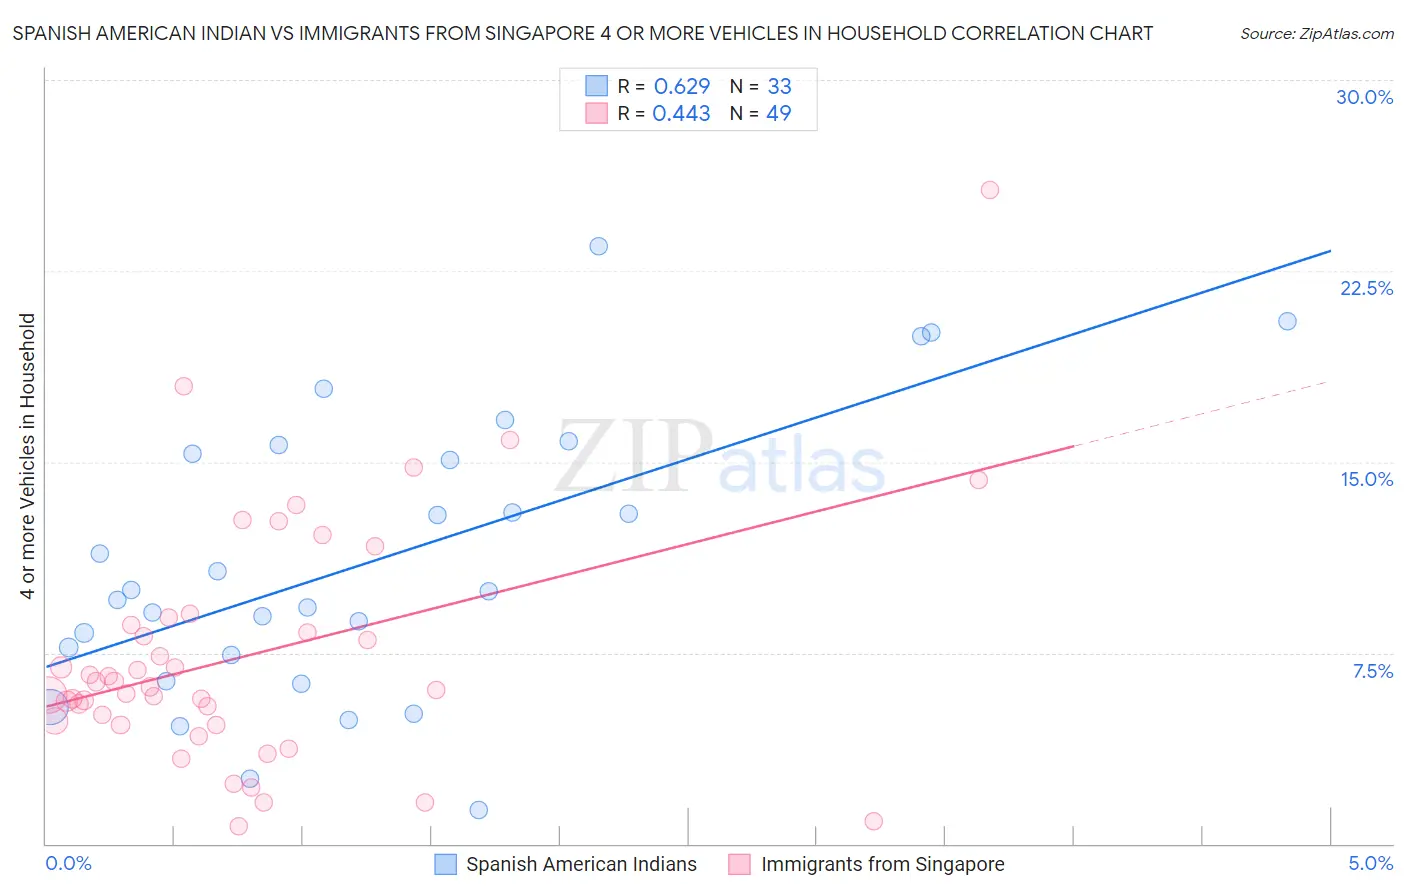 Spanish American Indian vs Immigrants from Singapore 4 or more Vehicles in Household